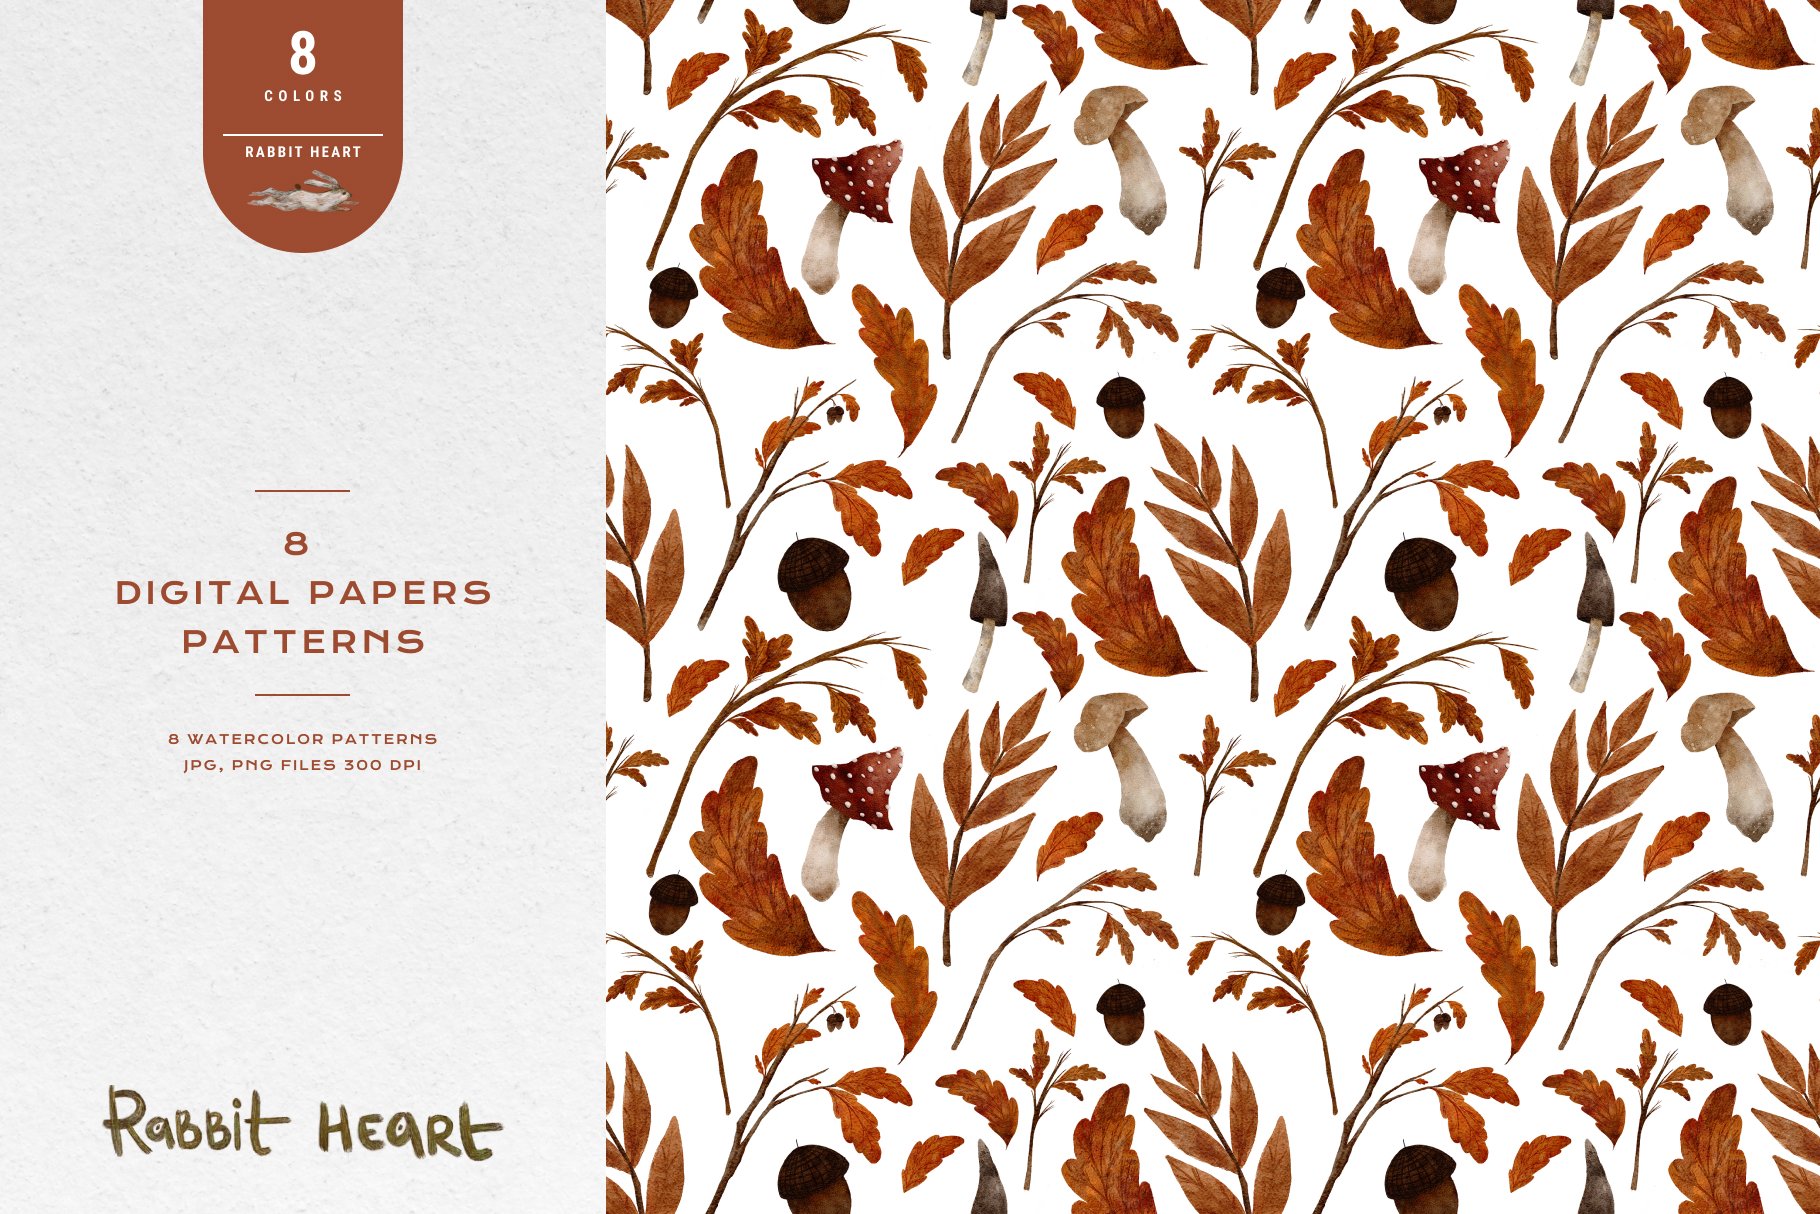 Fall Leafs - Digital Paper Set cover image.